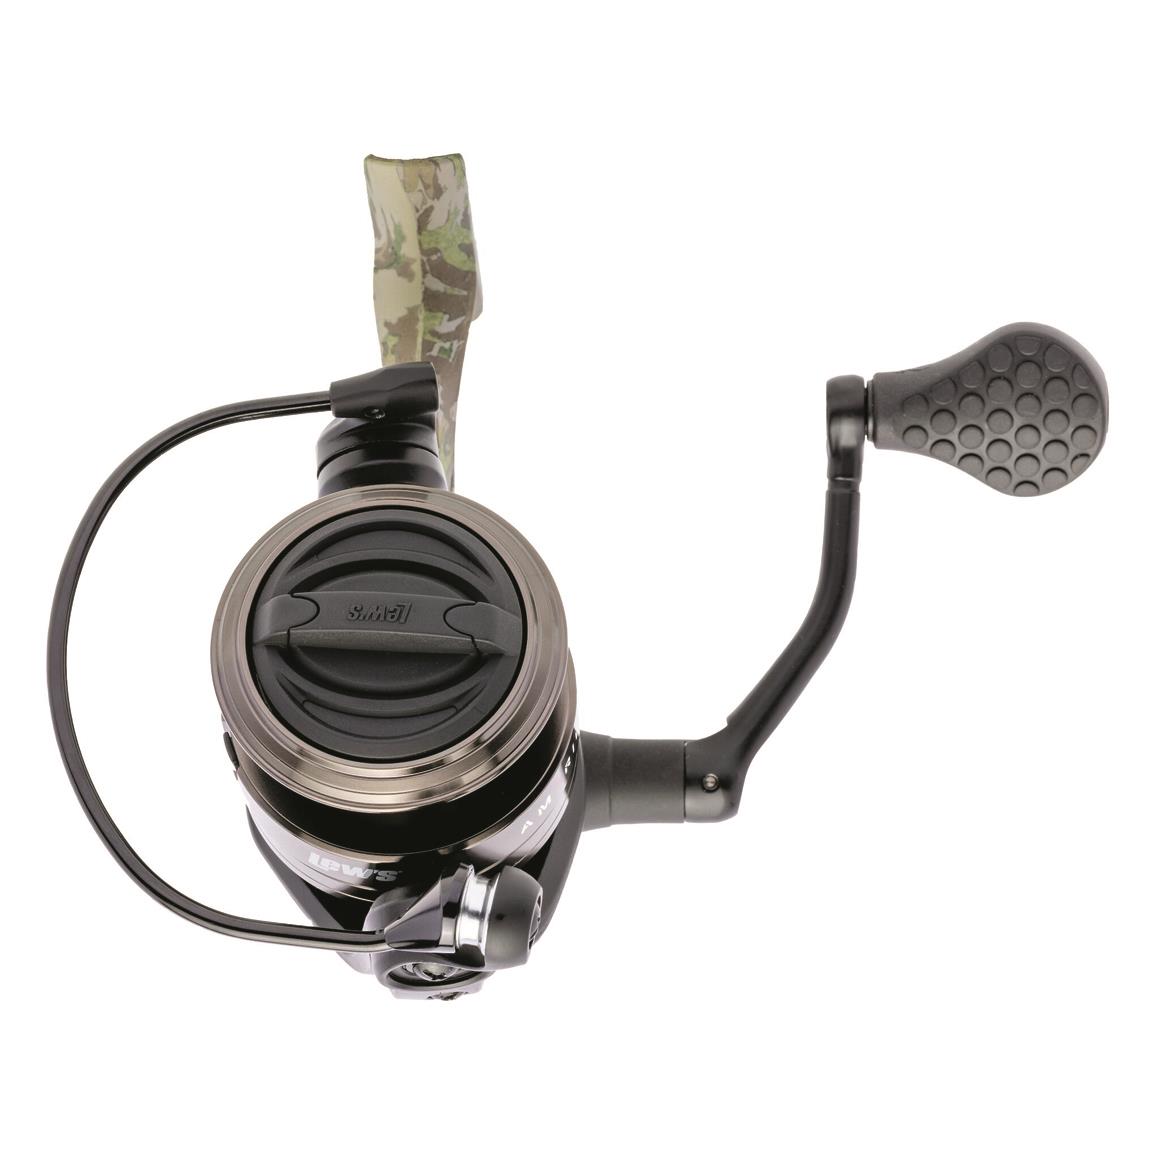 St. Croix X-Trek Spinning Rod & Reel Fishing Combo - 731204, Spinning Combos  at Sportsman's Guide